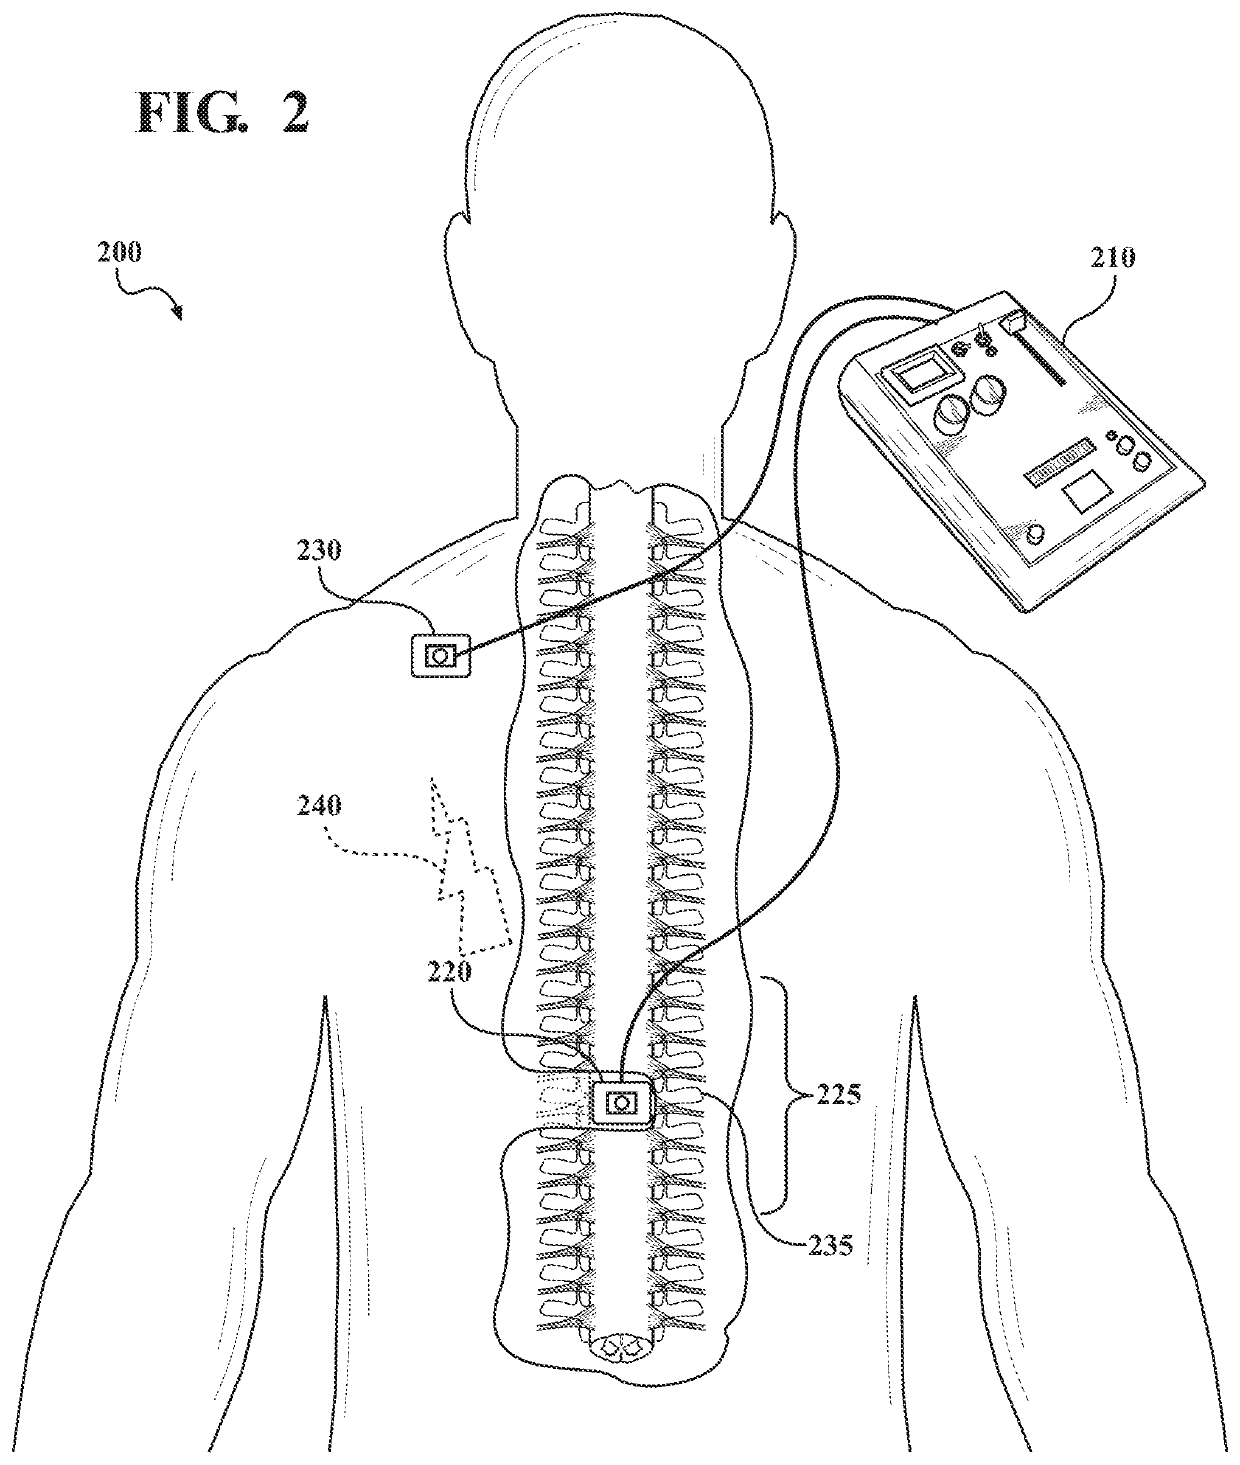 Transcutaneous spinal cord stimulation for treatment of psychiatric disorders